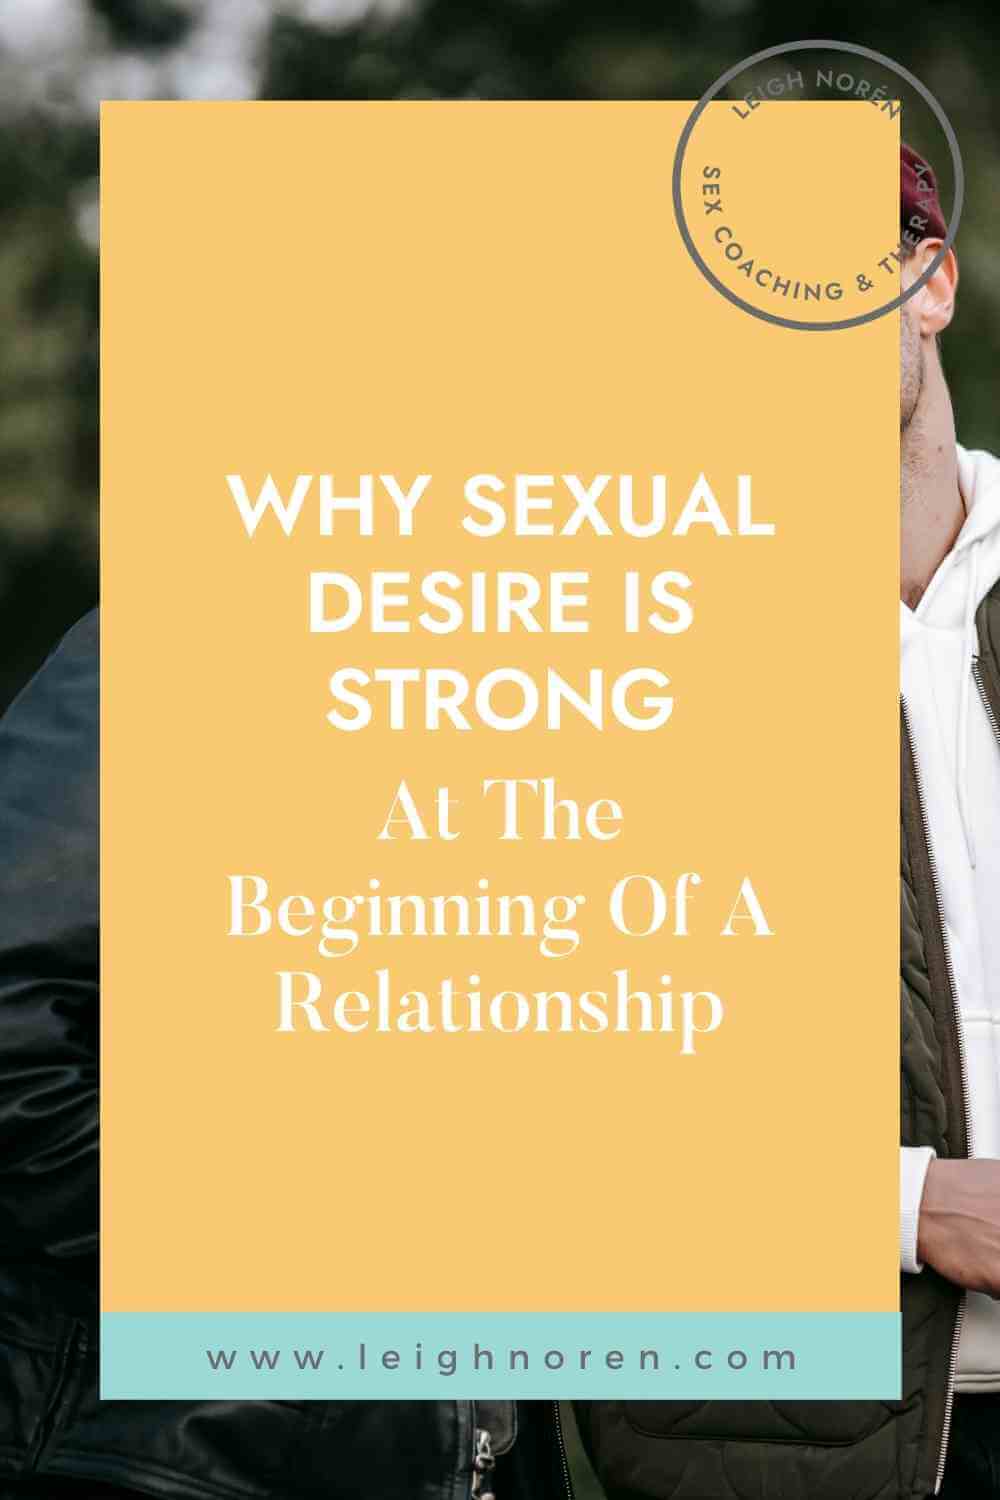 Why Sexual Desire Is Strong At The Beginning Of Relationships